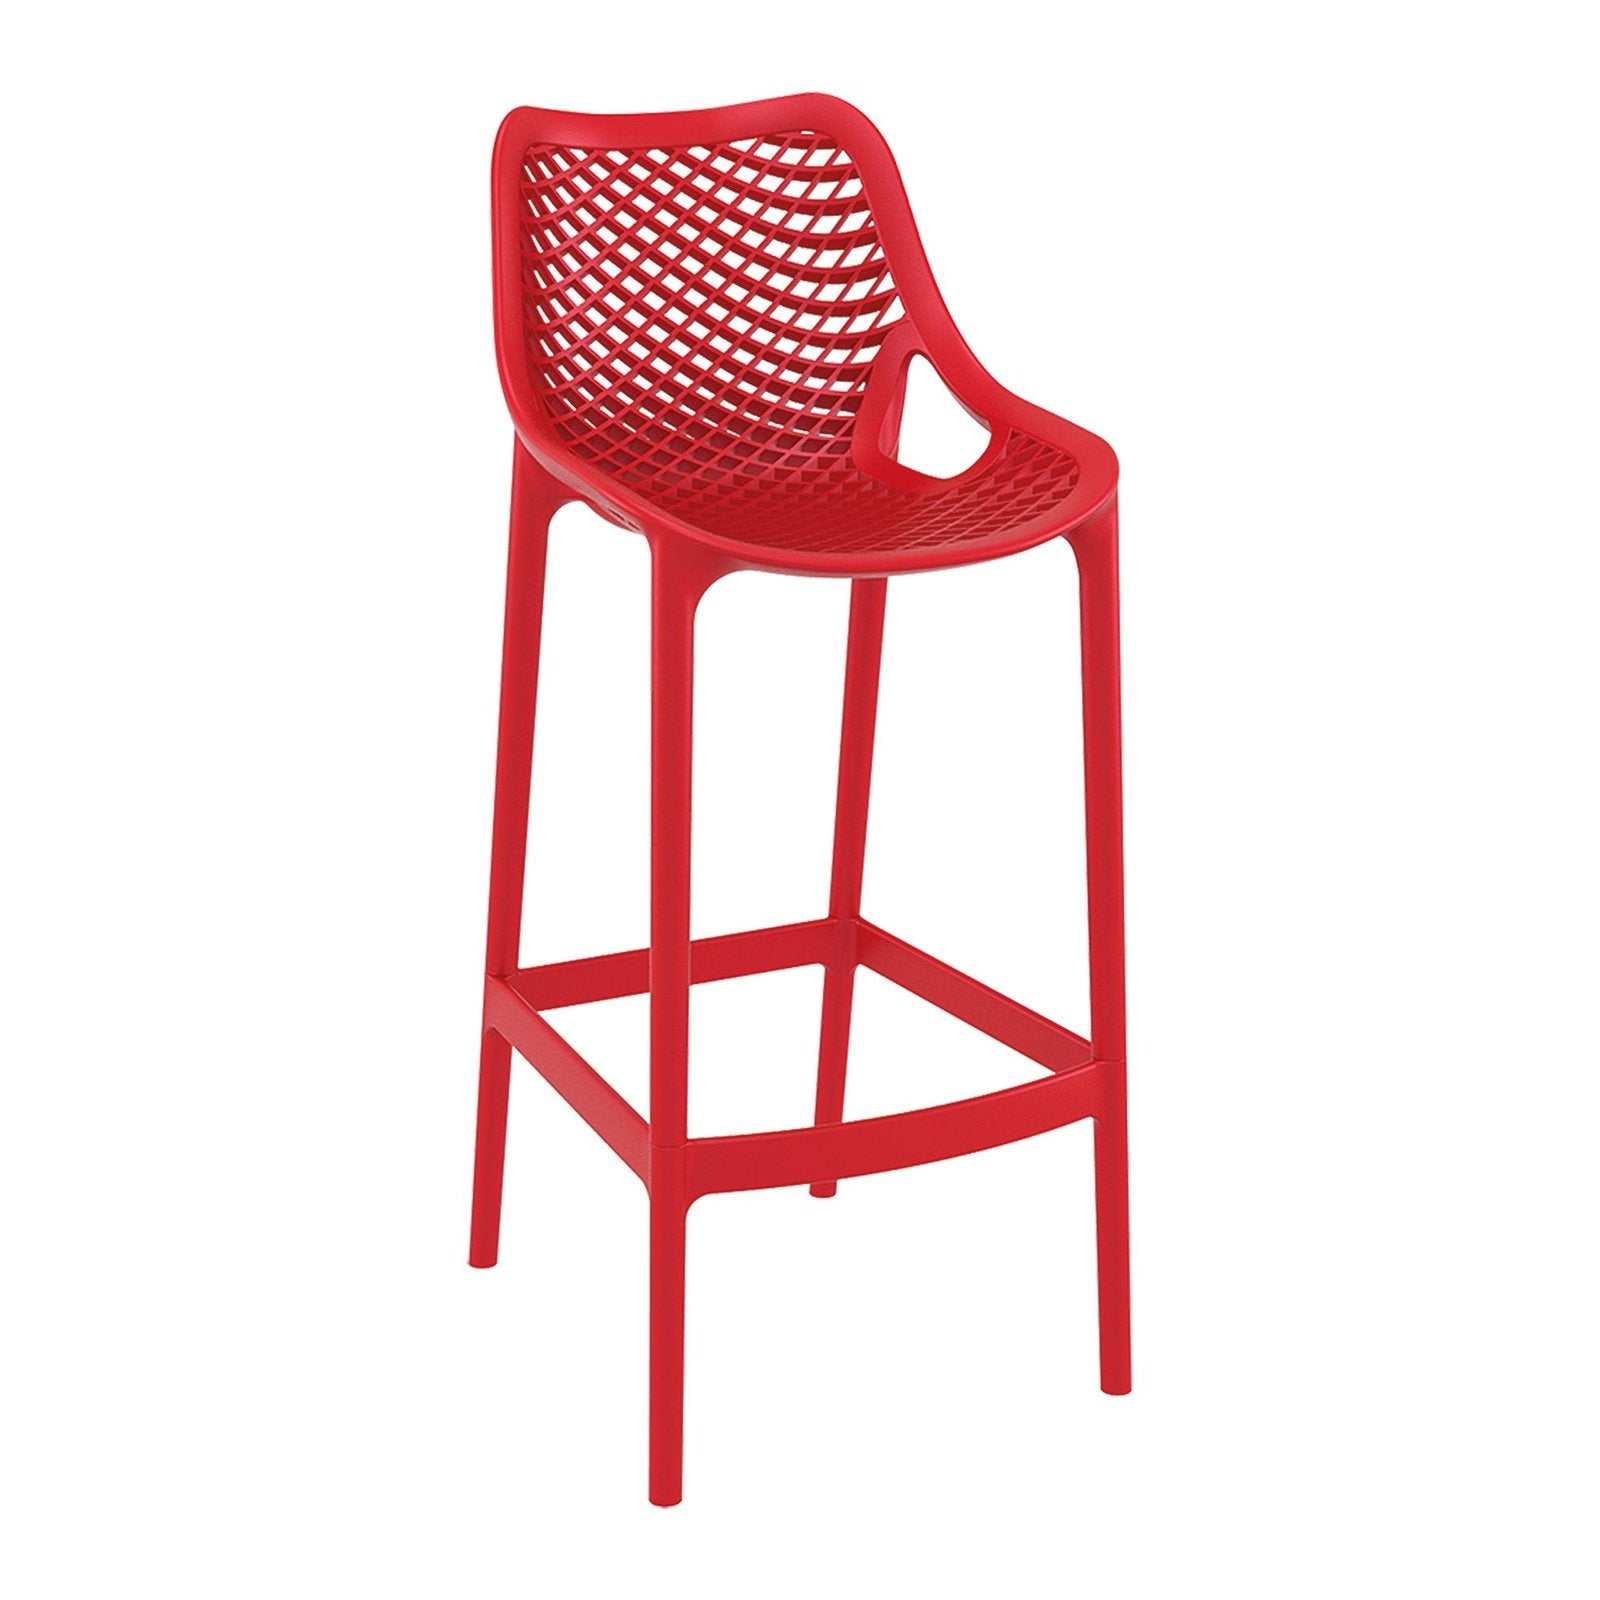 Leg Poly High Height Barstool - 4 Per Box - Office Products Online